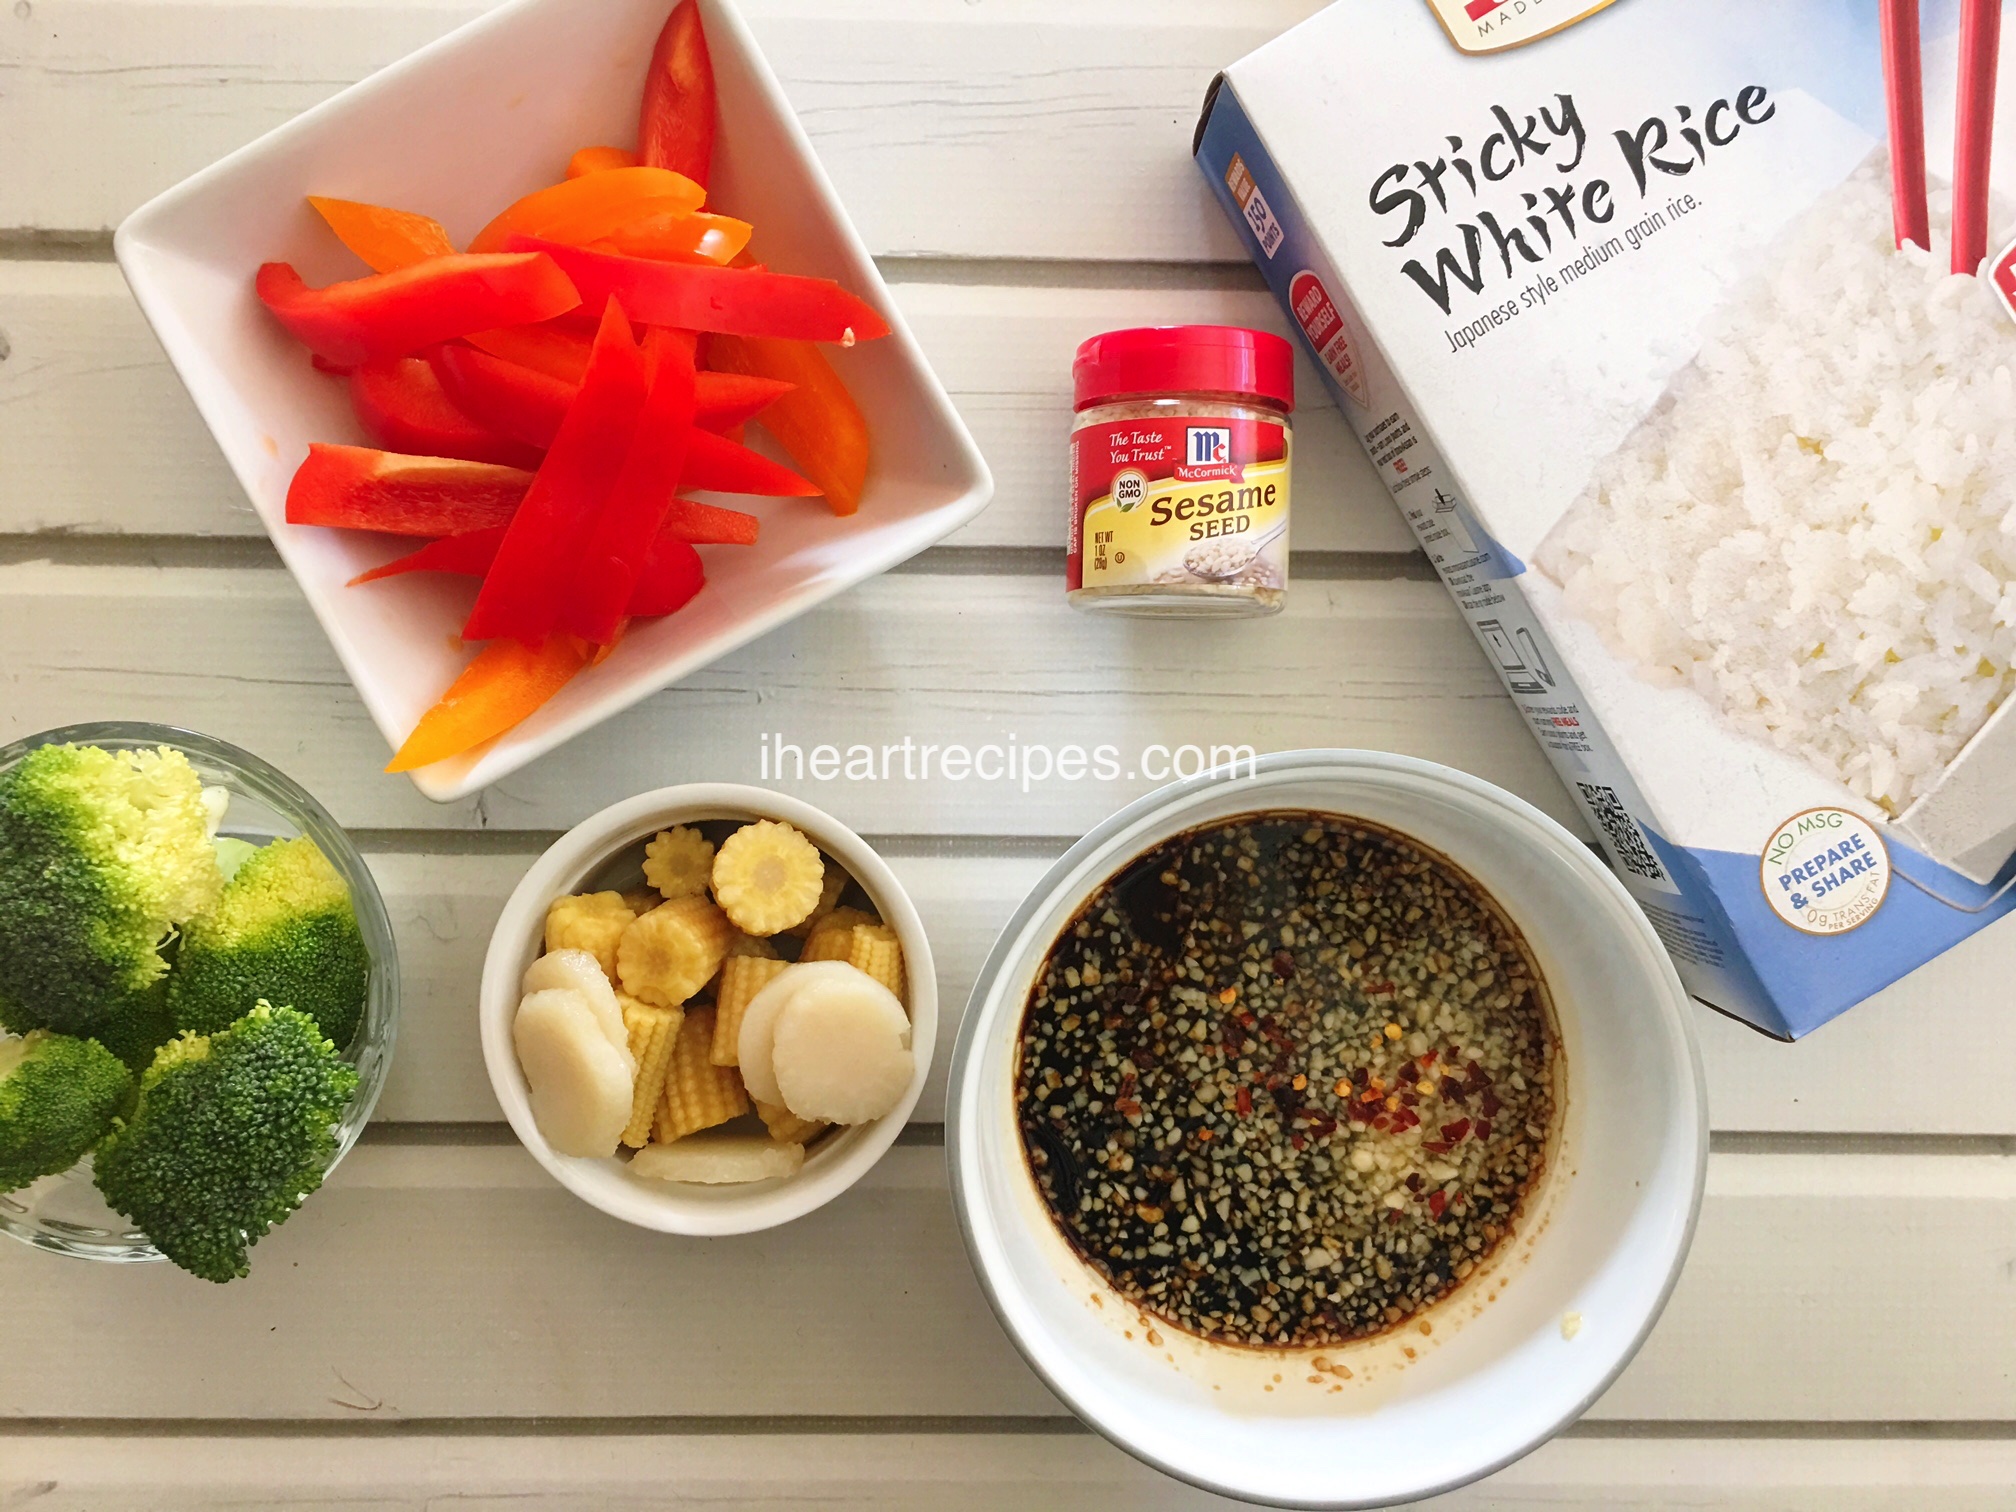 Ingredients needed to make a healthy vegetable stir fry -- sliced bell peppers, broccoli, water chestnuts, baby corns, a simple sauce, sesame seeds, and a box of sticky white rice.